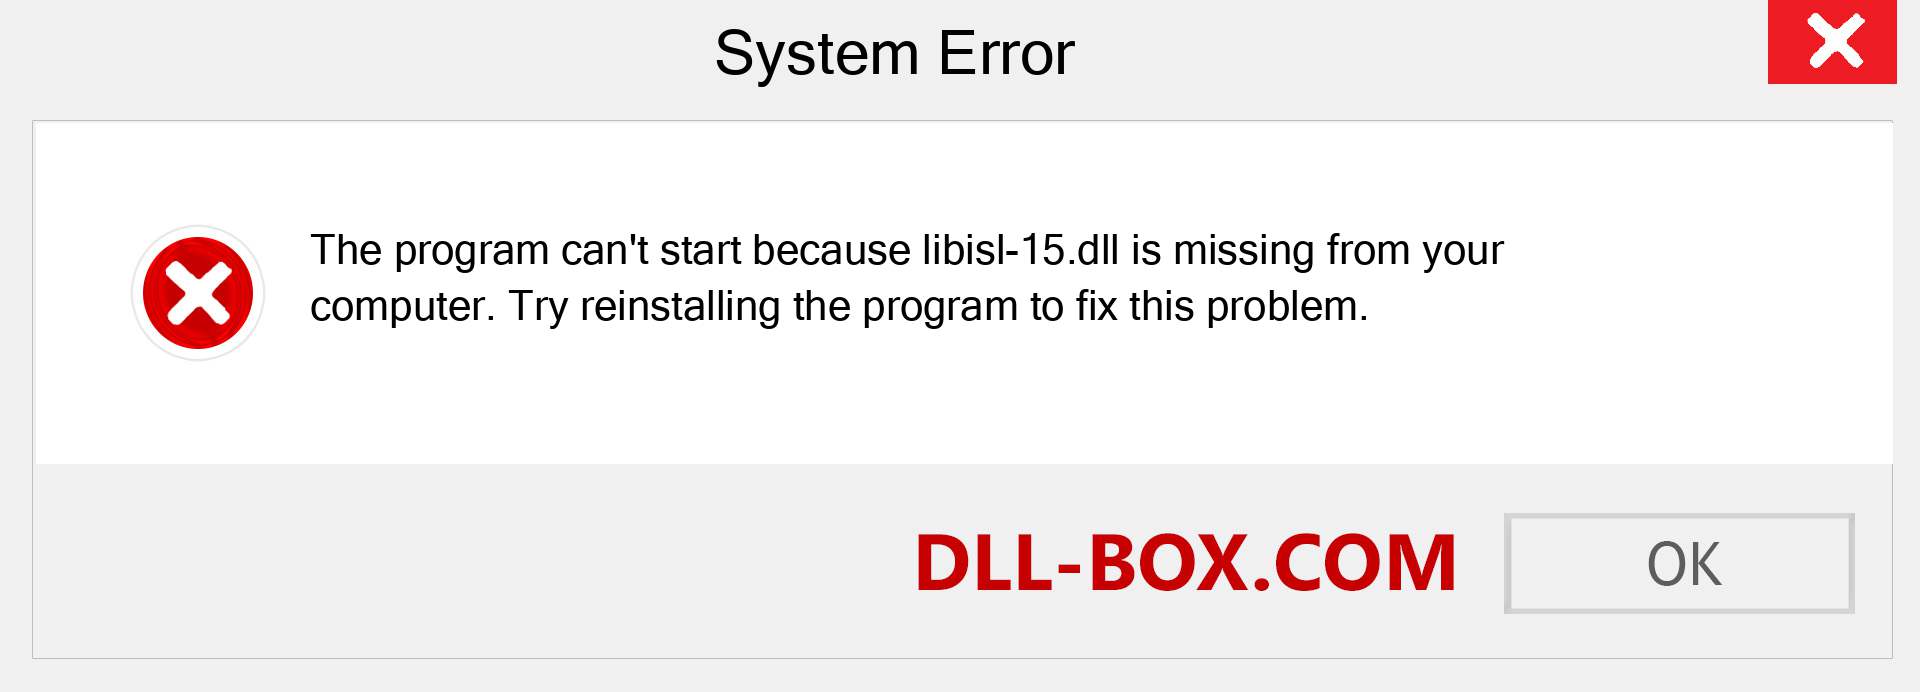  libisl-15.dll file is missing?. Download for Windows 7, 8, 10 - Fix  libisl-15 dll Missing Error on Windows, photos, images